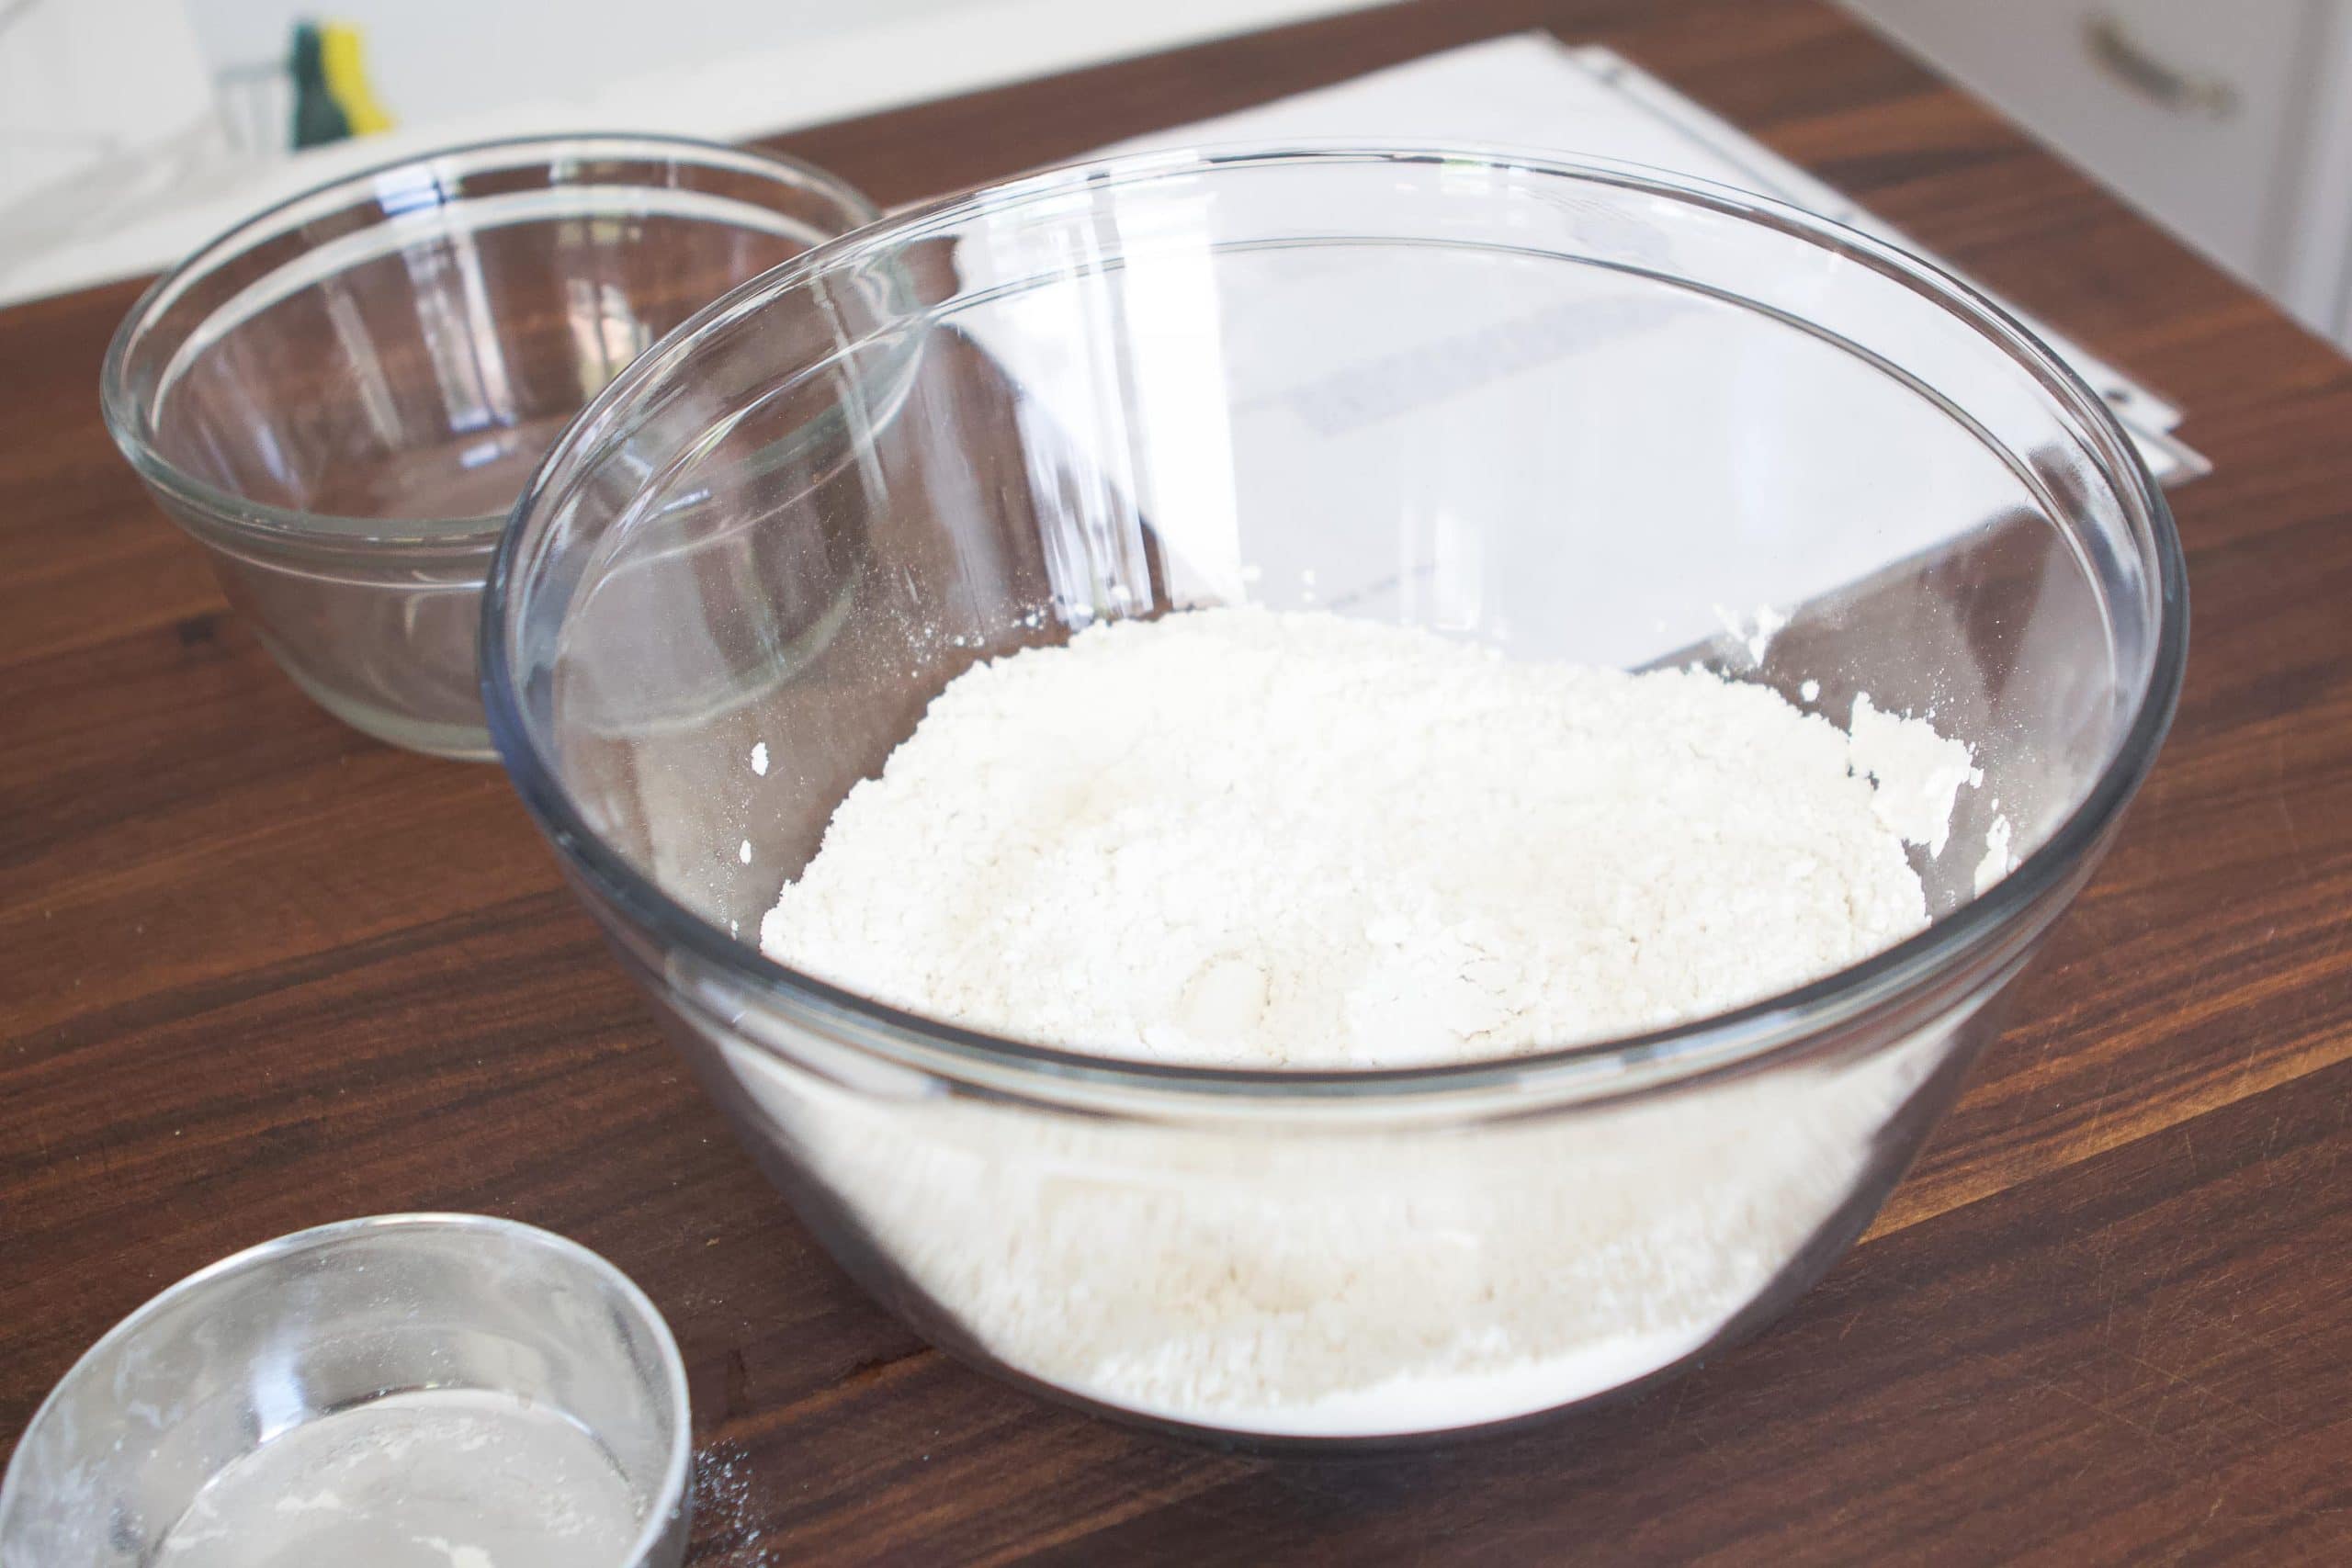 Combine dry ingredients before adding them to the batter